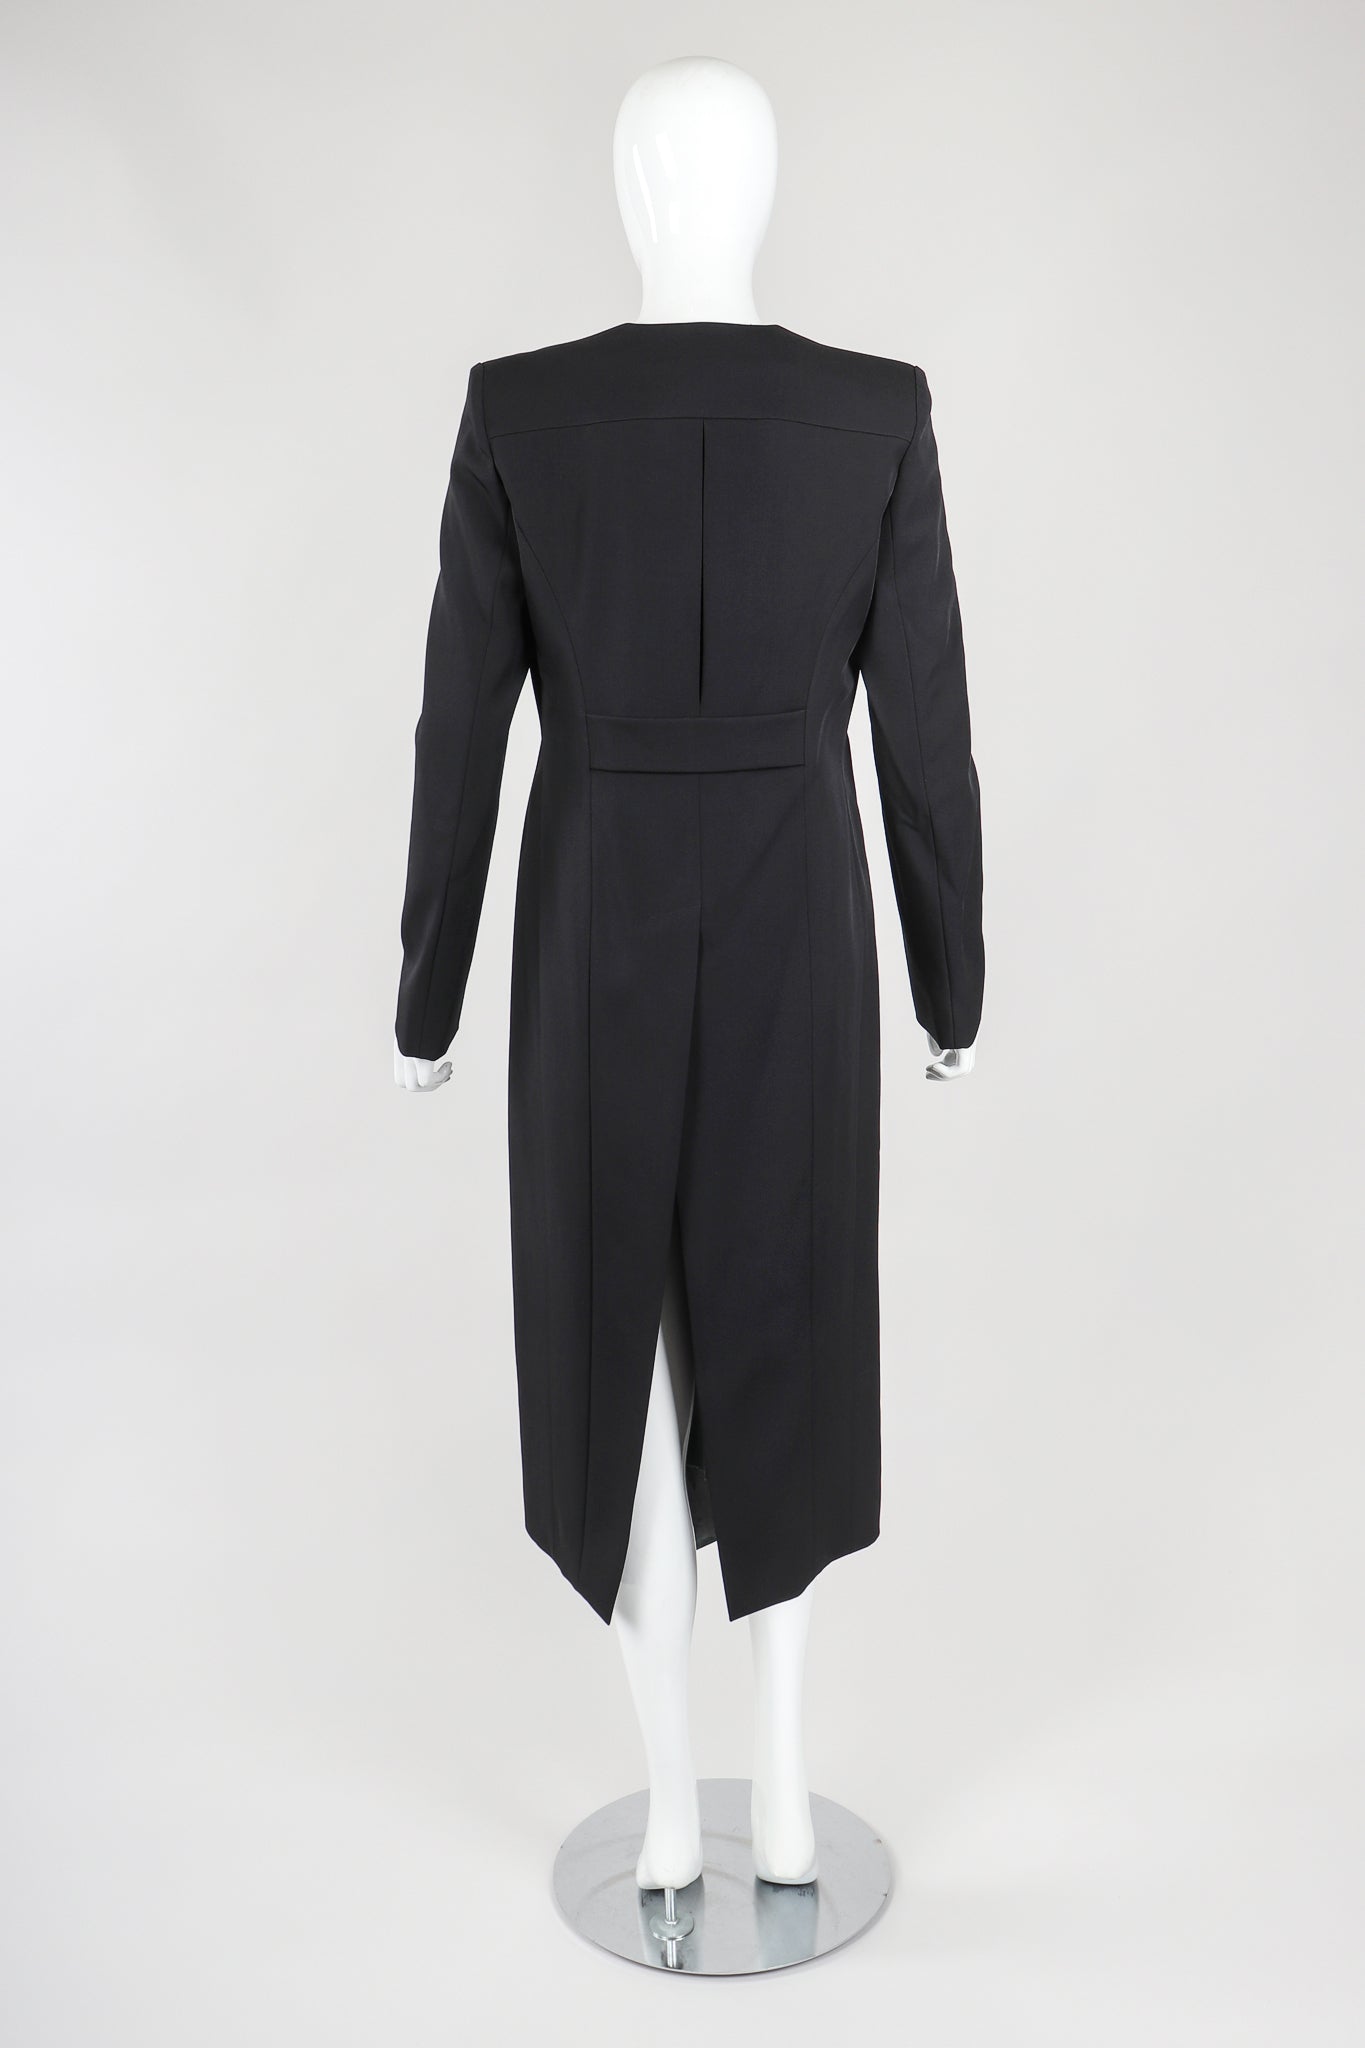 Recess Vintage Mugler Black Leather and Wool Tail Coat on Mannequin, Back View